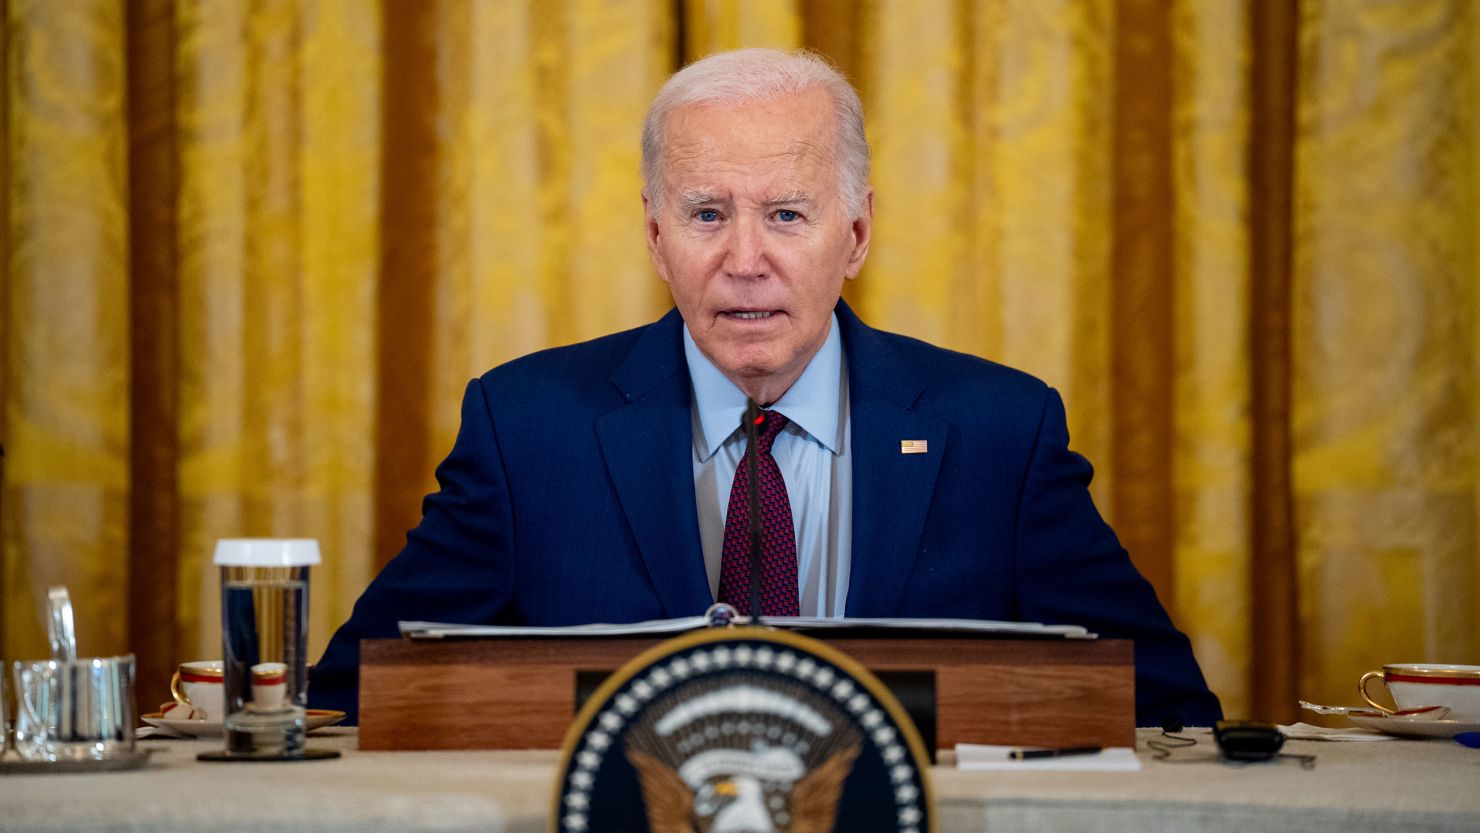 President Joe Biden speaks during a trilateral meeting with Japanese Prime Minister Fumio Kishida and Filipino President Ferdinand Marcos in the East Room of the White House on April 11, 2024 in Washington, DC.